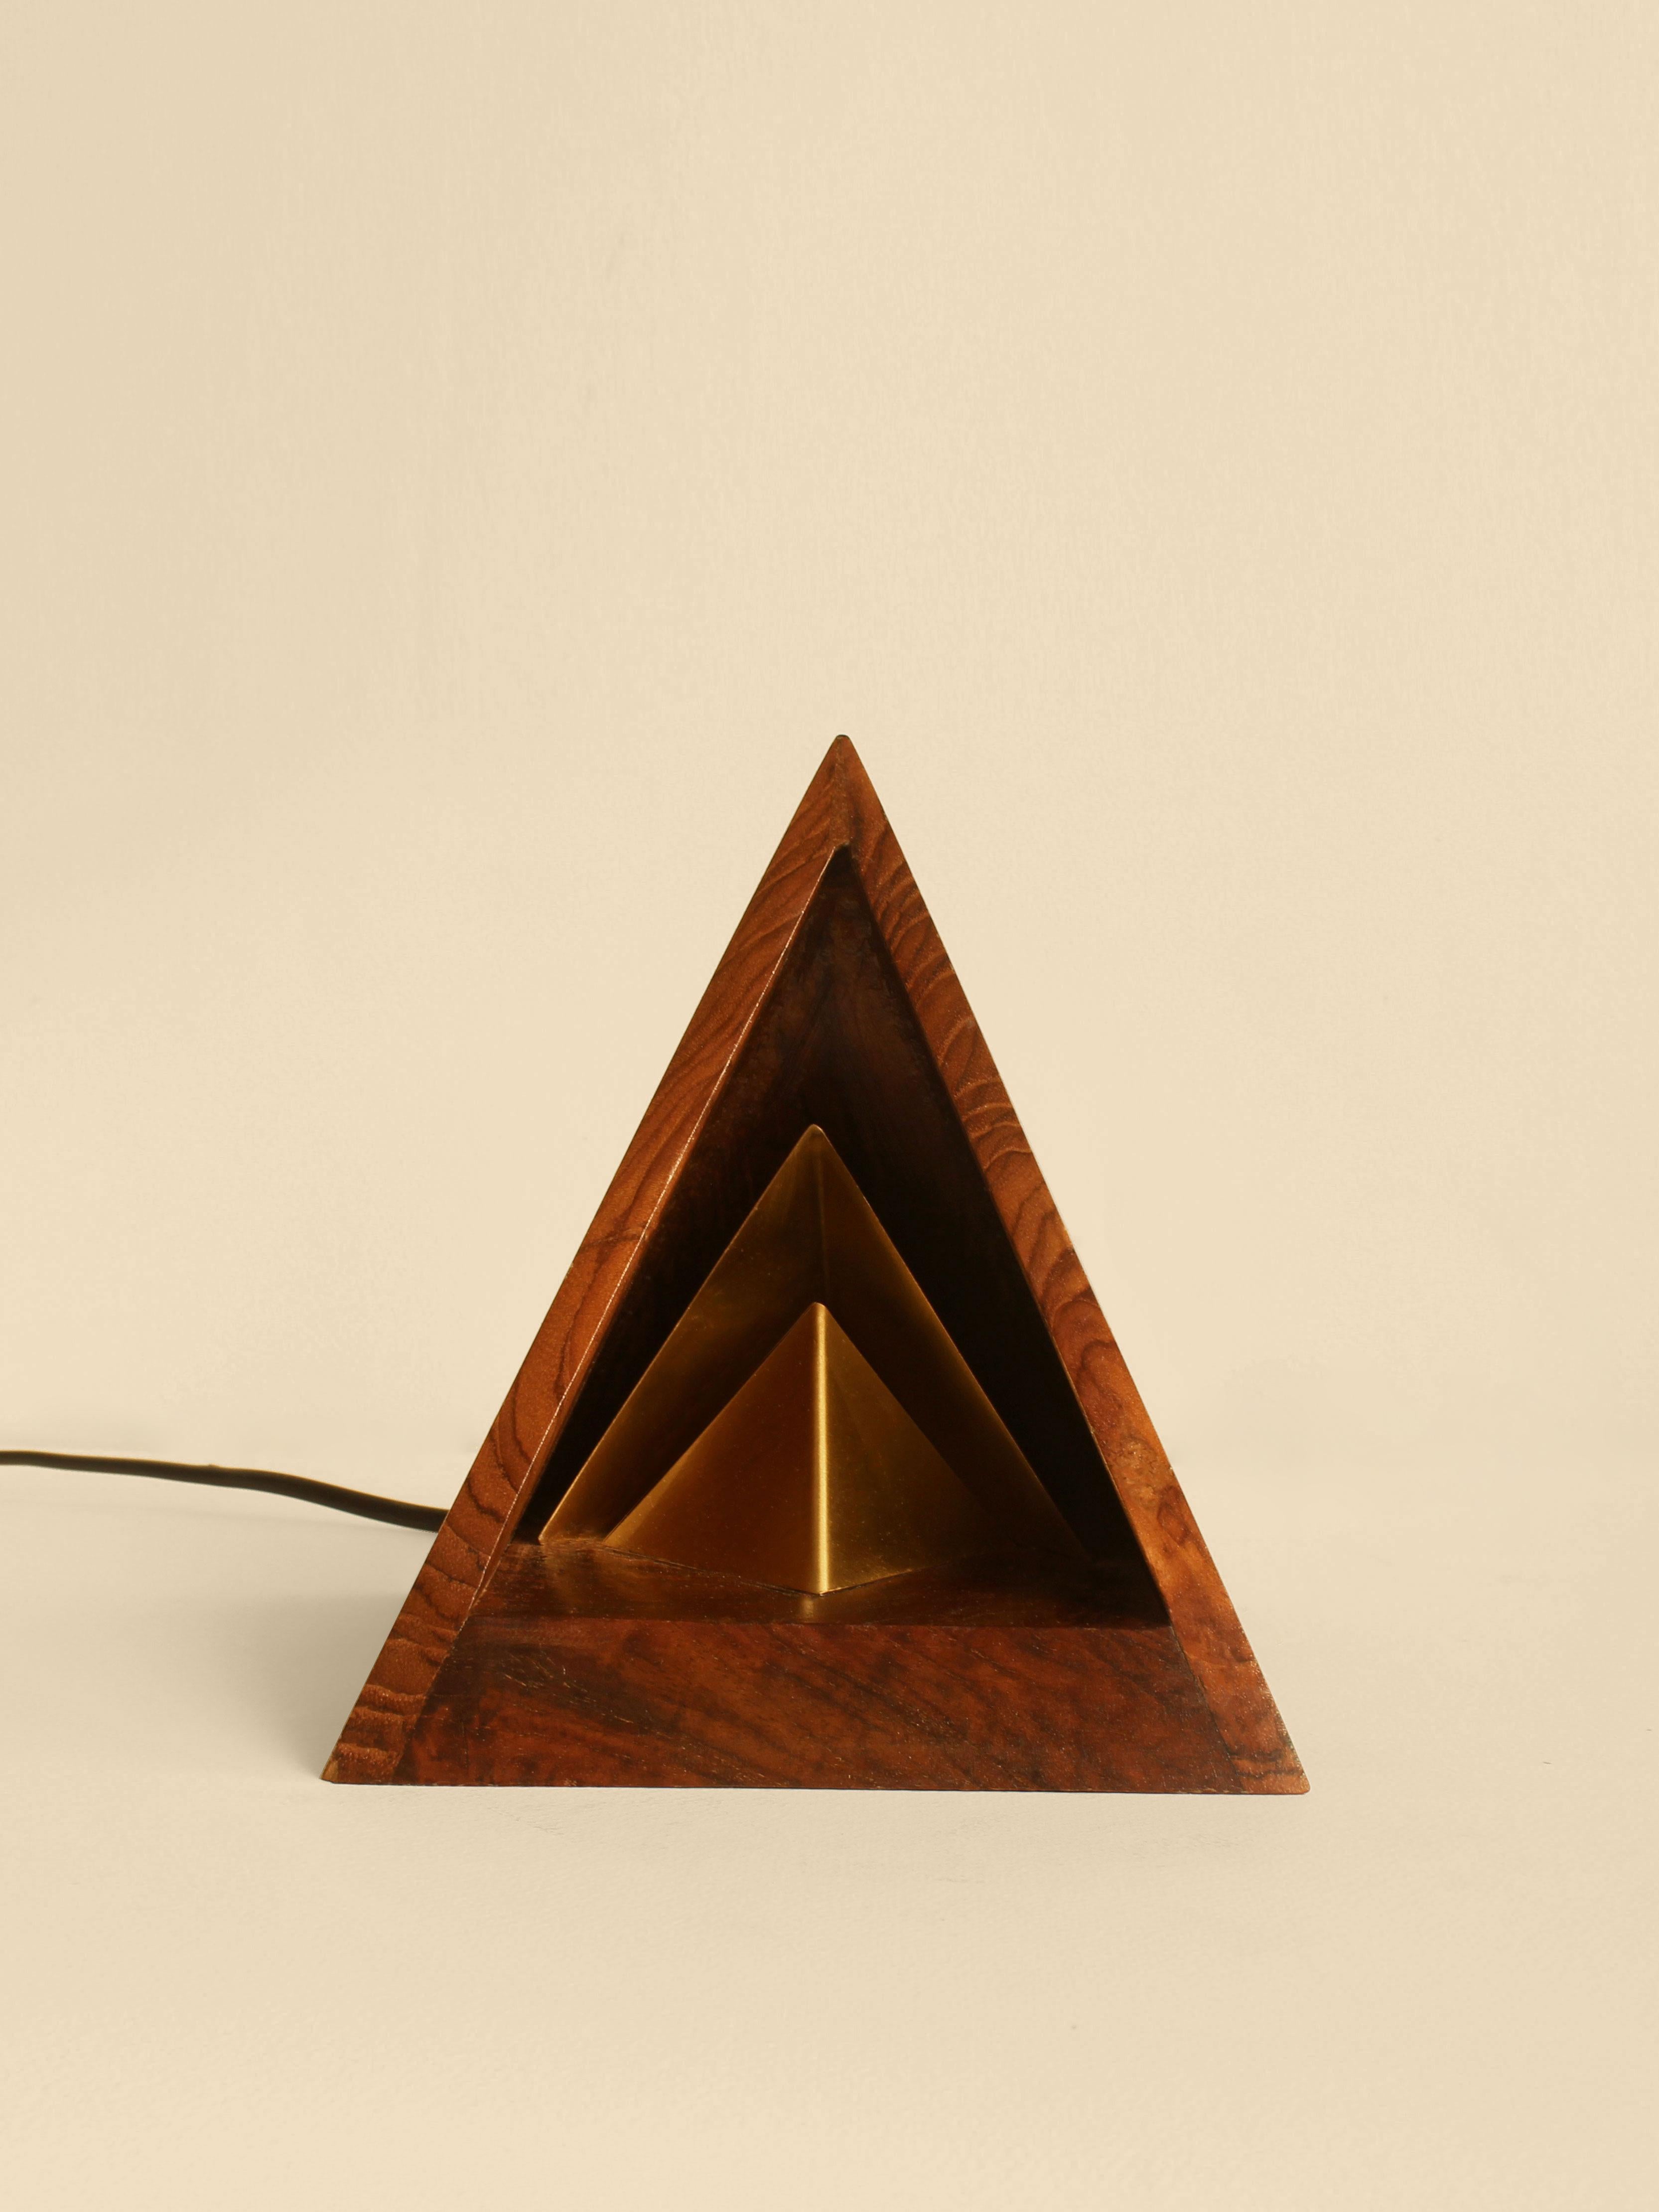 Vihaan Table Lamp by Studio Indigene
Dimensions: D 14 x W 14 x H 17.14 cm
Materials: Reclaimed Teak Wood, Brass.
Colors Brown, Natural Wooden, Brass Finish.

Vihaan, born from experiments with indirect light, casts a golden glow, perfect for setting